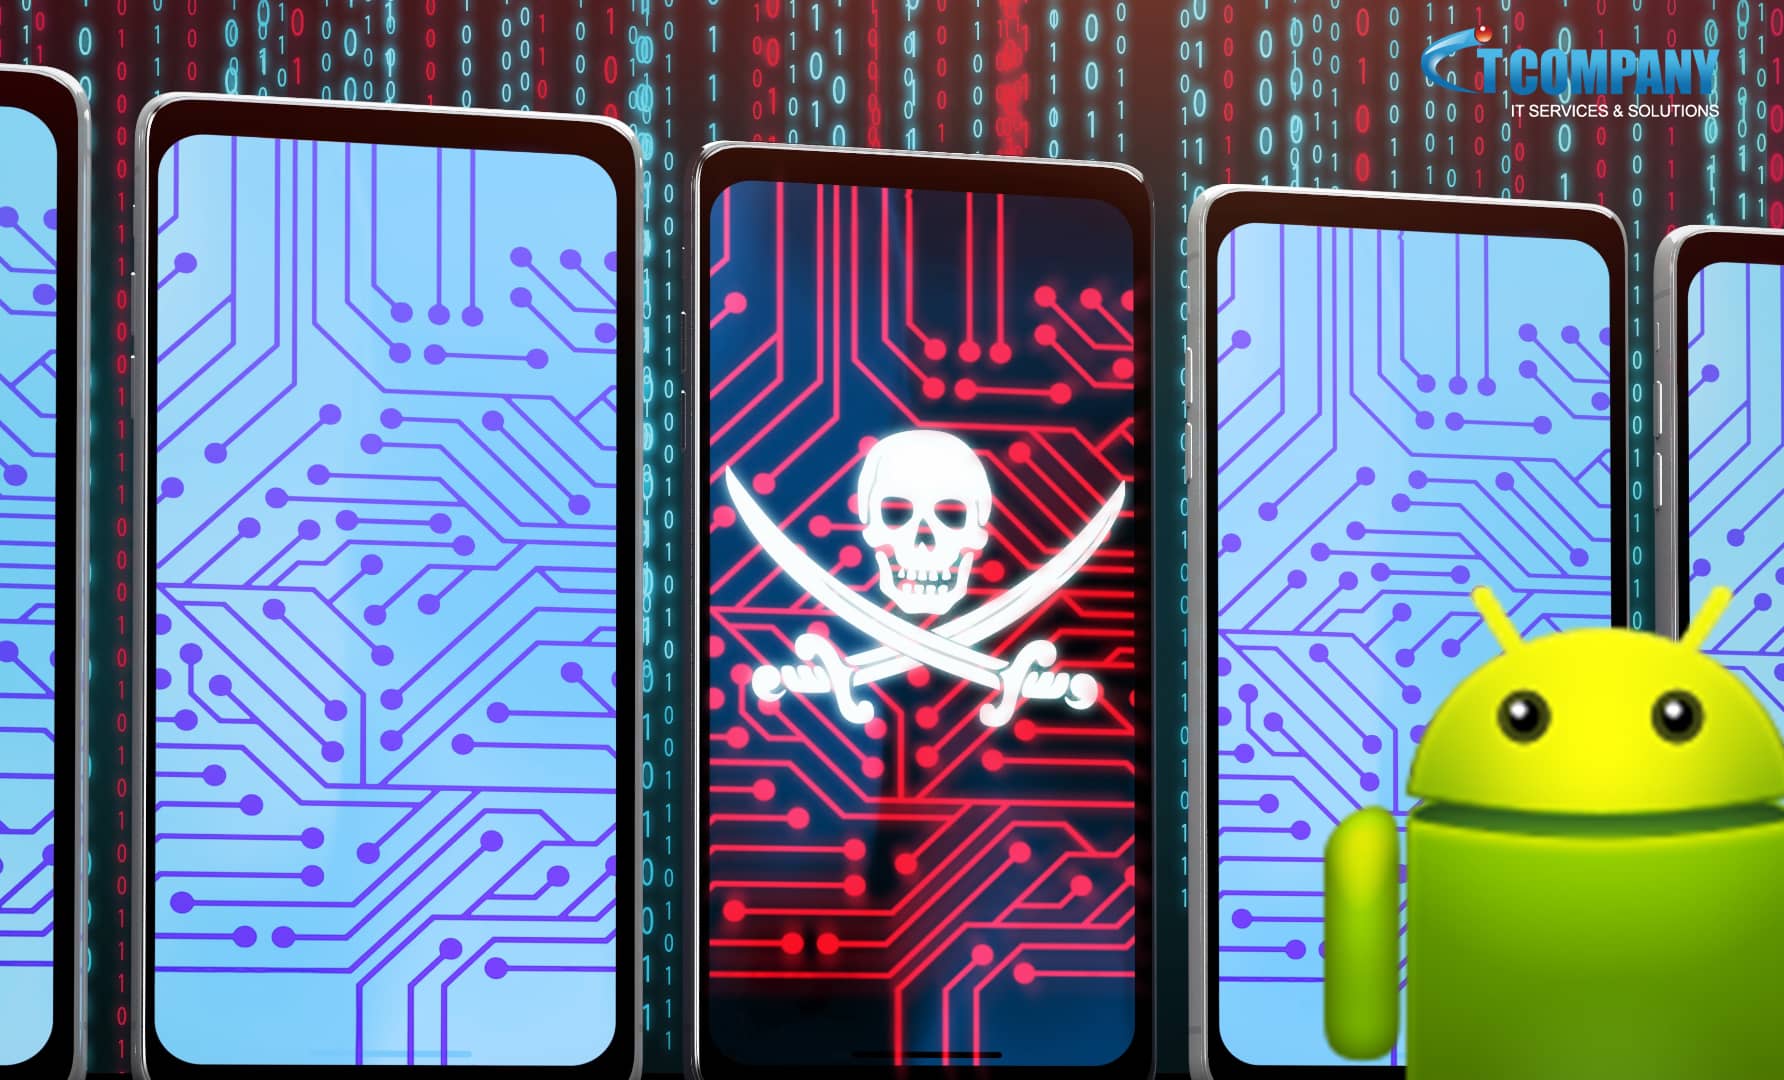 Many Android devices may be vulnerable to attack as a result of this vulnerability